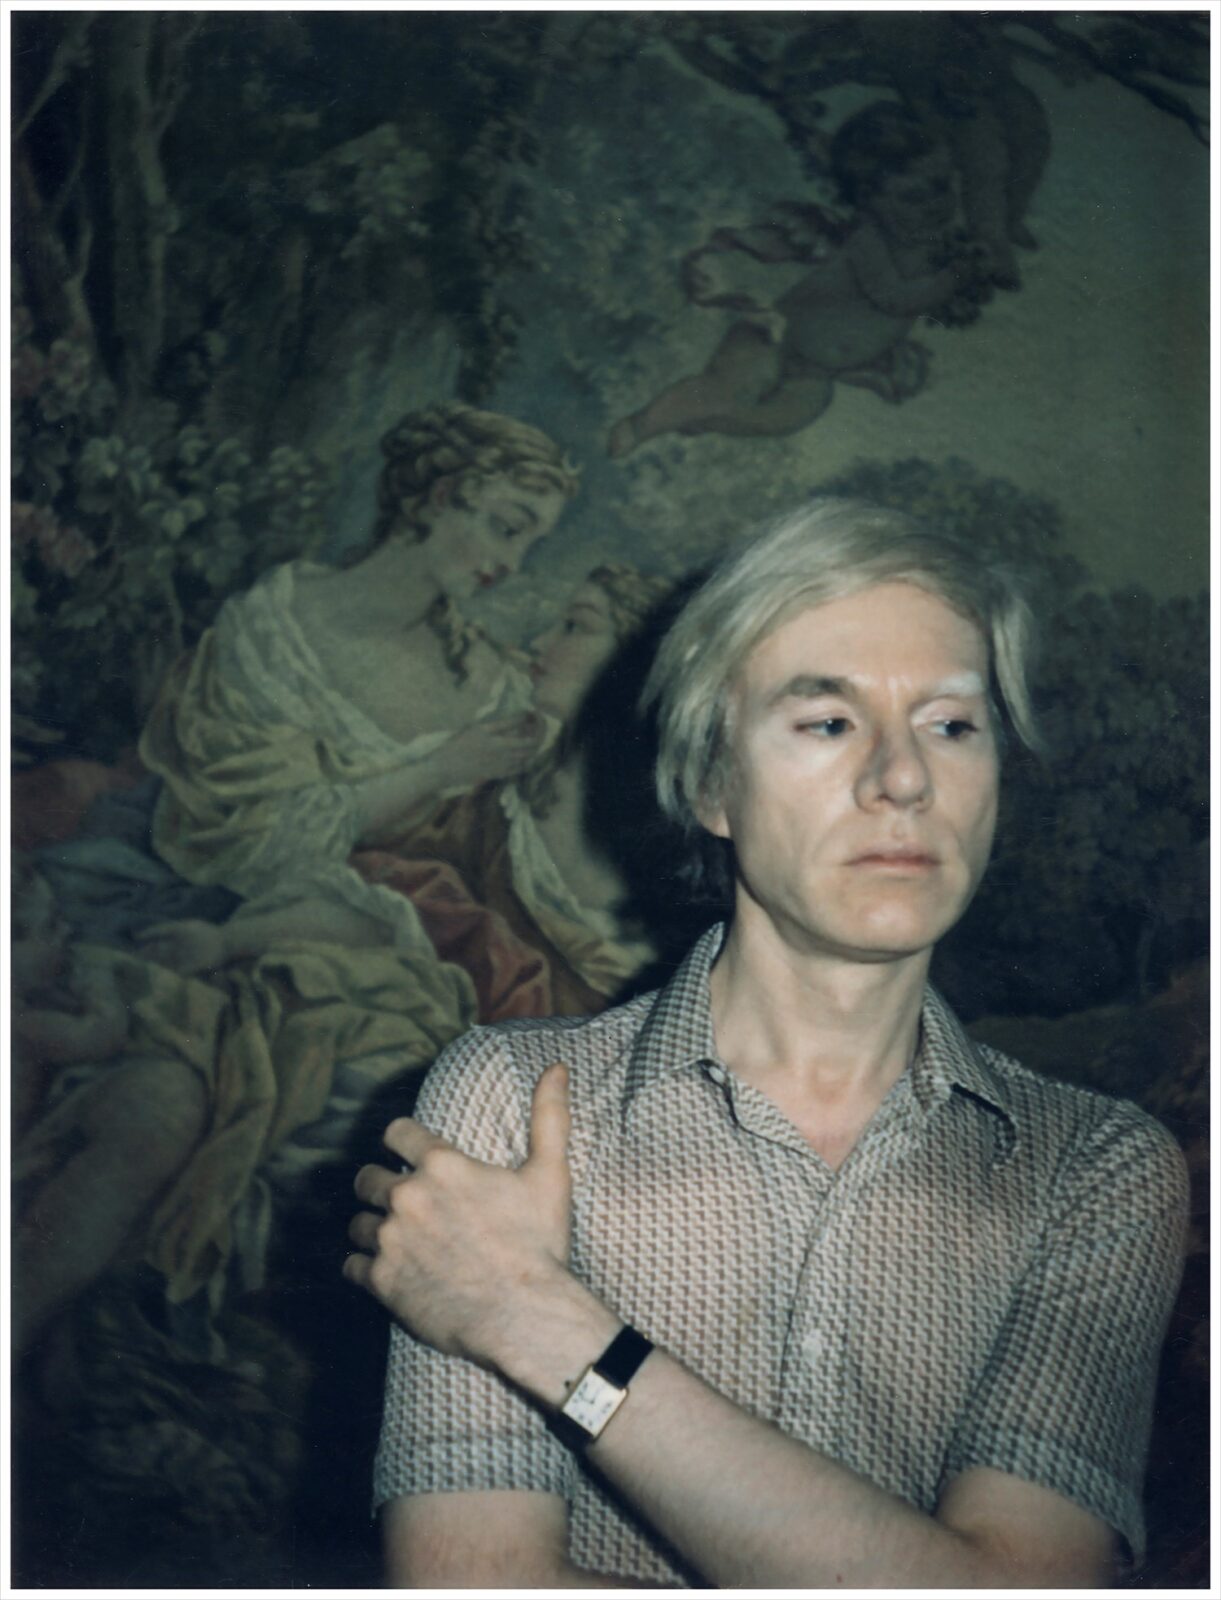 Andy Warhol - The Andy Warhol Foundation for the visual arts